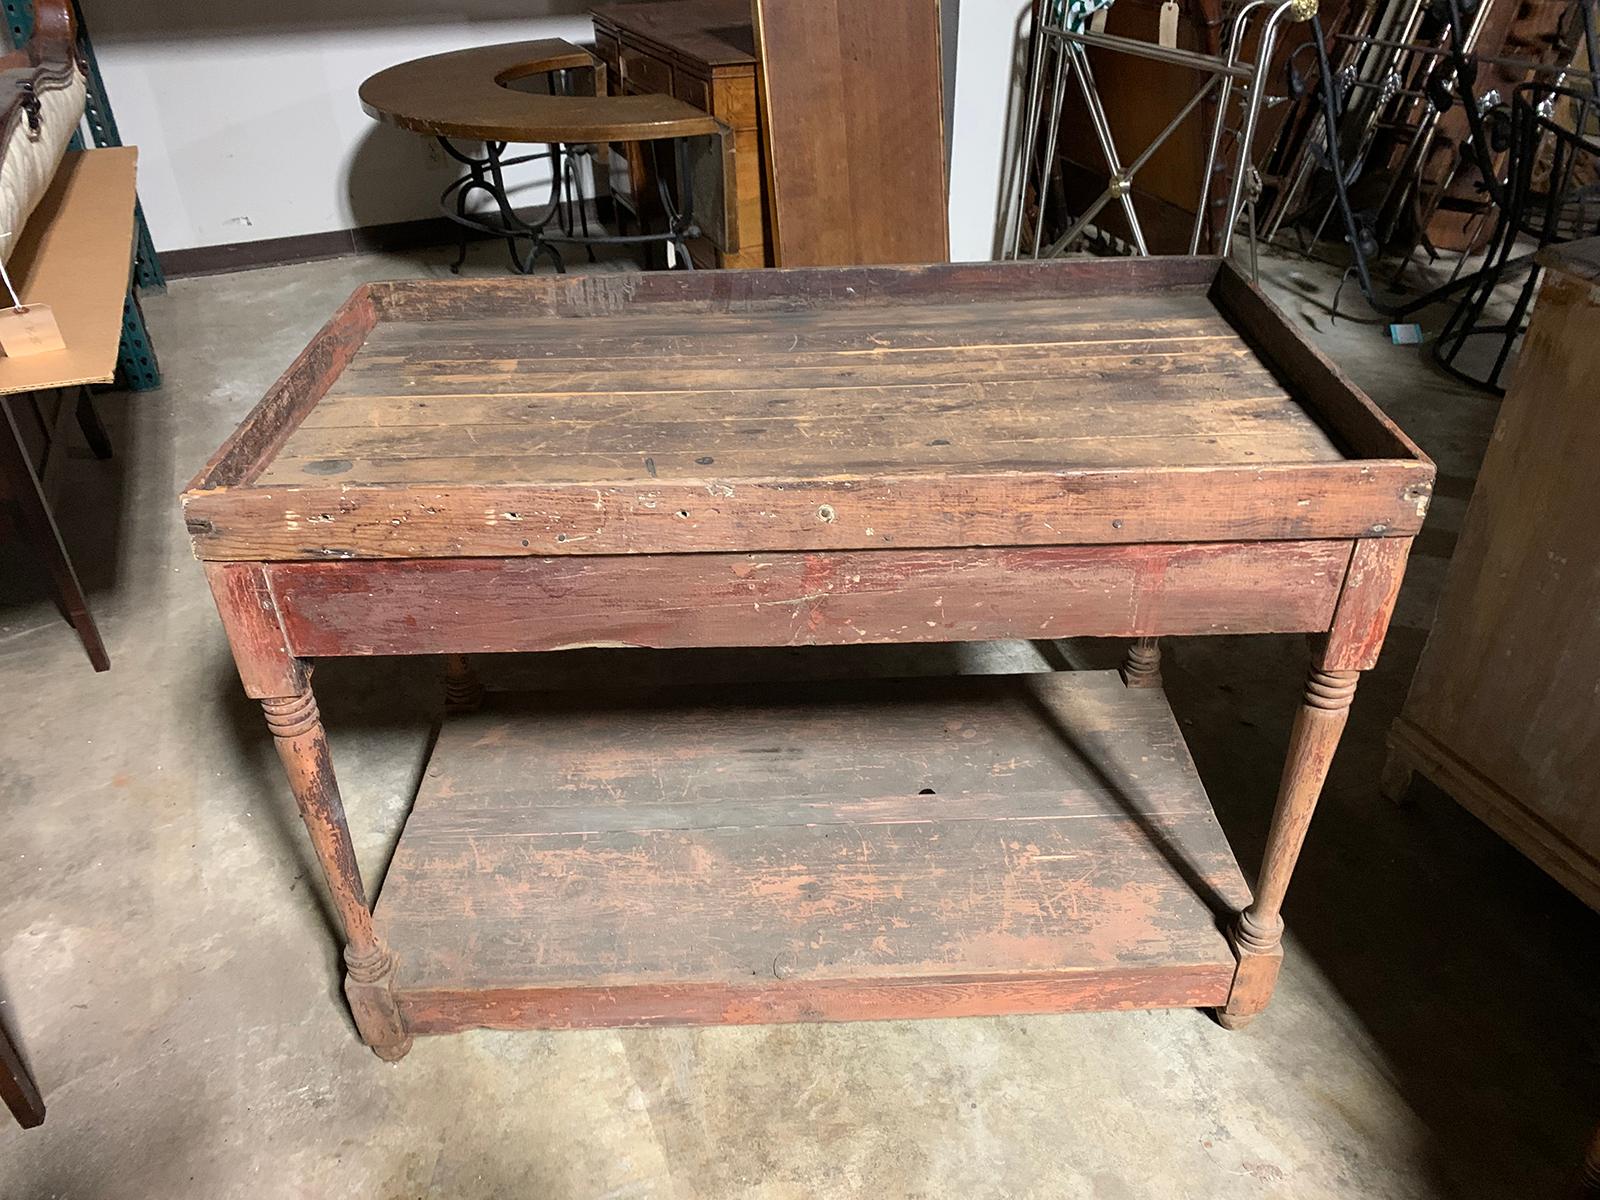 19th-Early 20th Century Primitive American Painted Work Table, Original Finish 14